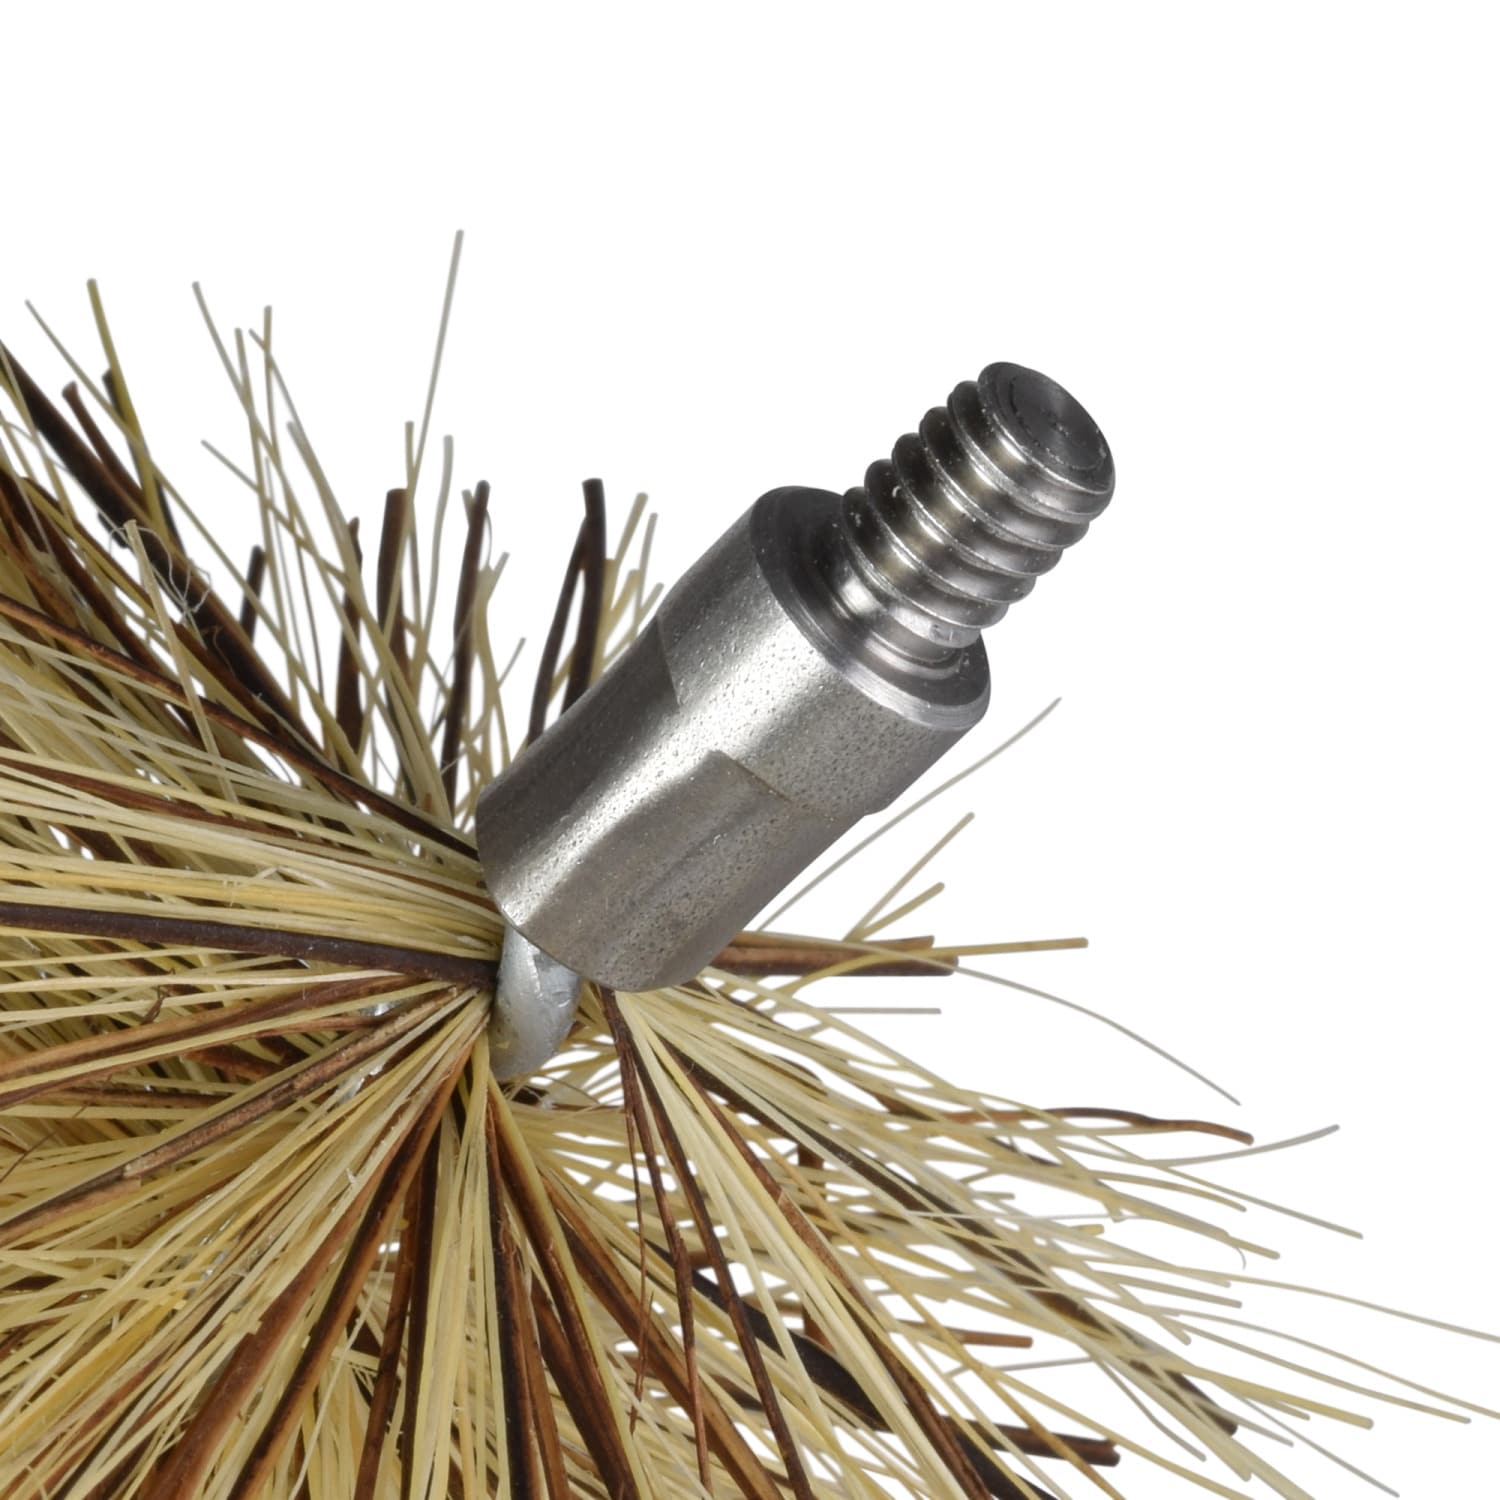 4 Pellet Stove Brush, twisted wire center w/ ball tip, 5/16-18 thread :  Rodtech USA